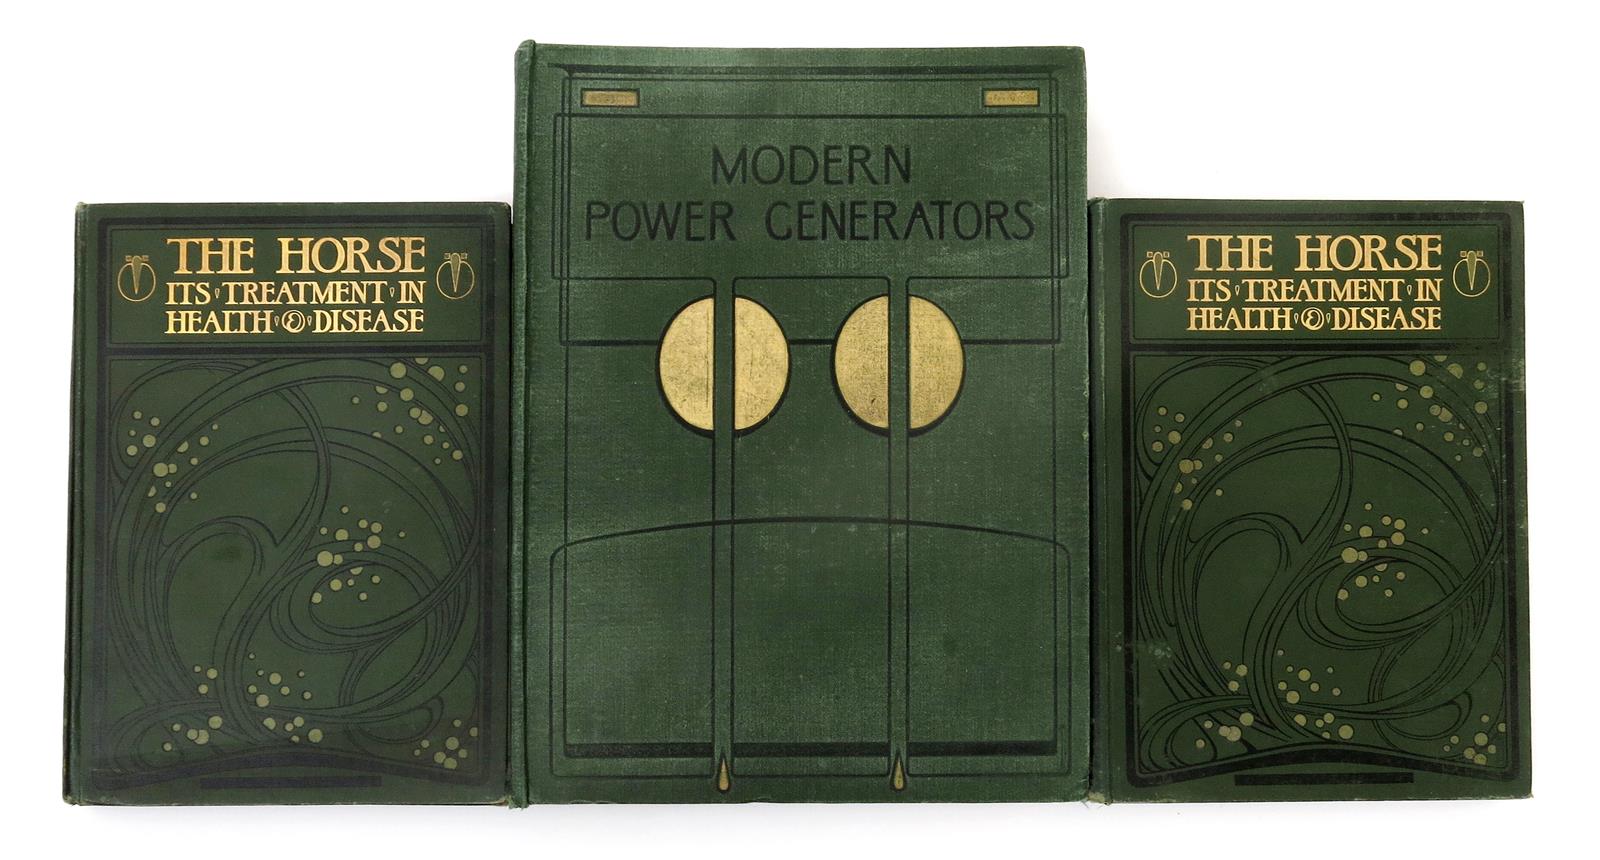 Modern Power Generators Volume 1 and 2, two books with cover designs by Talwin Morris, published